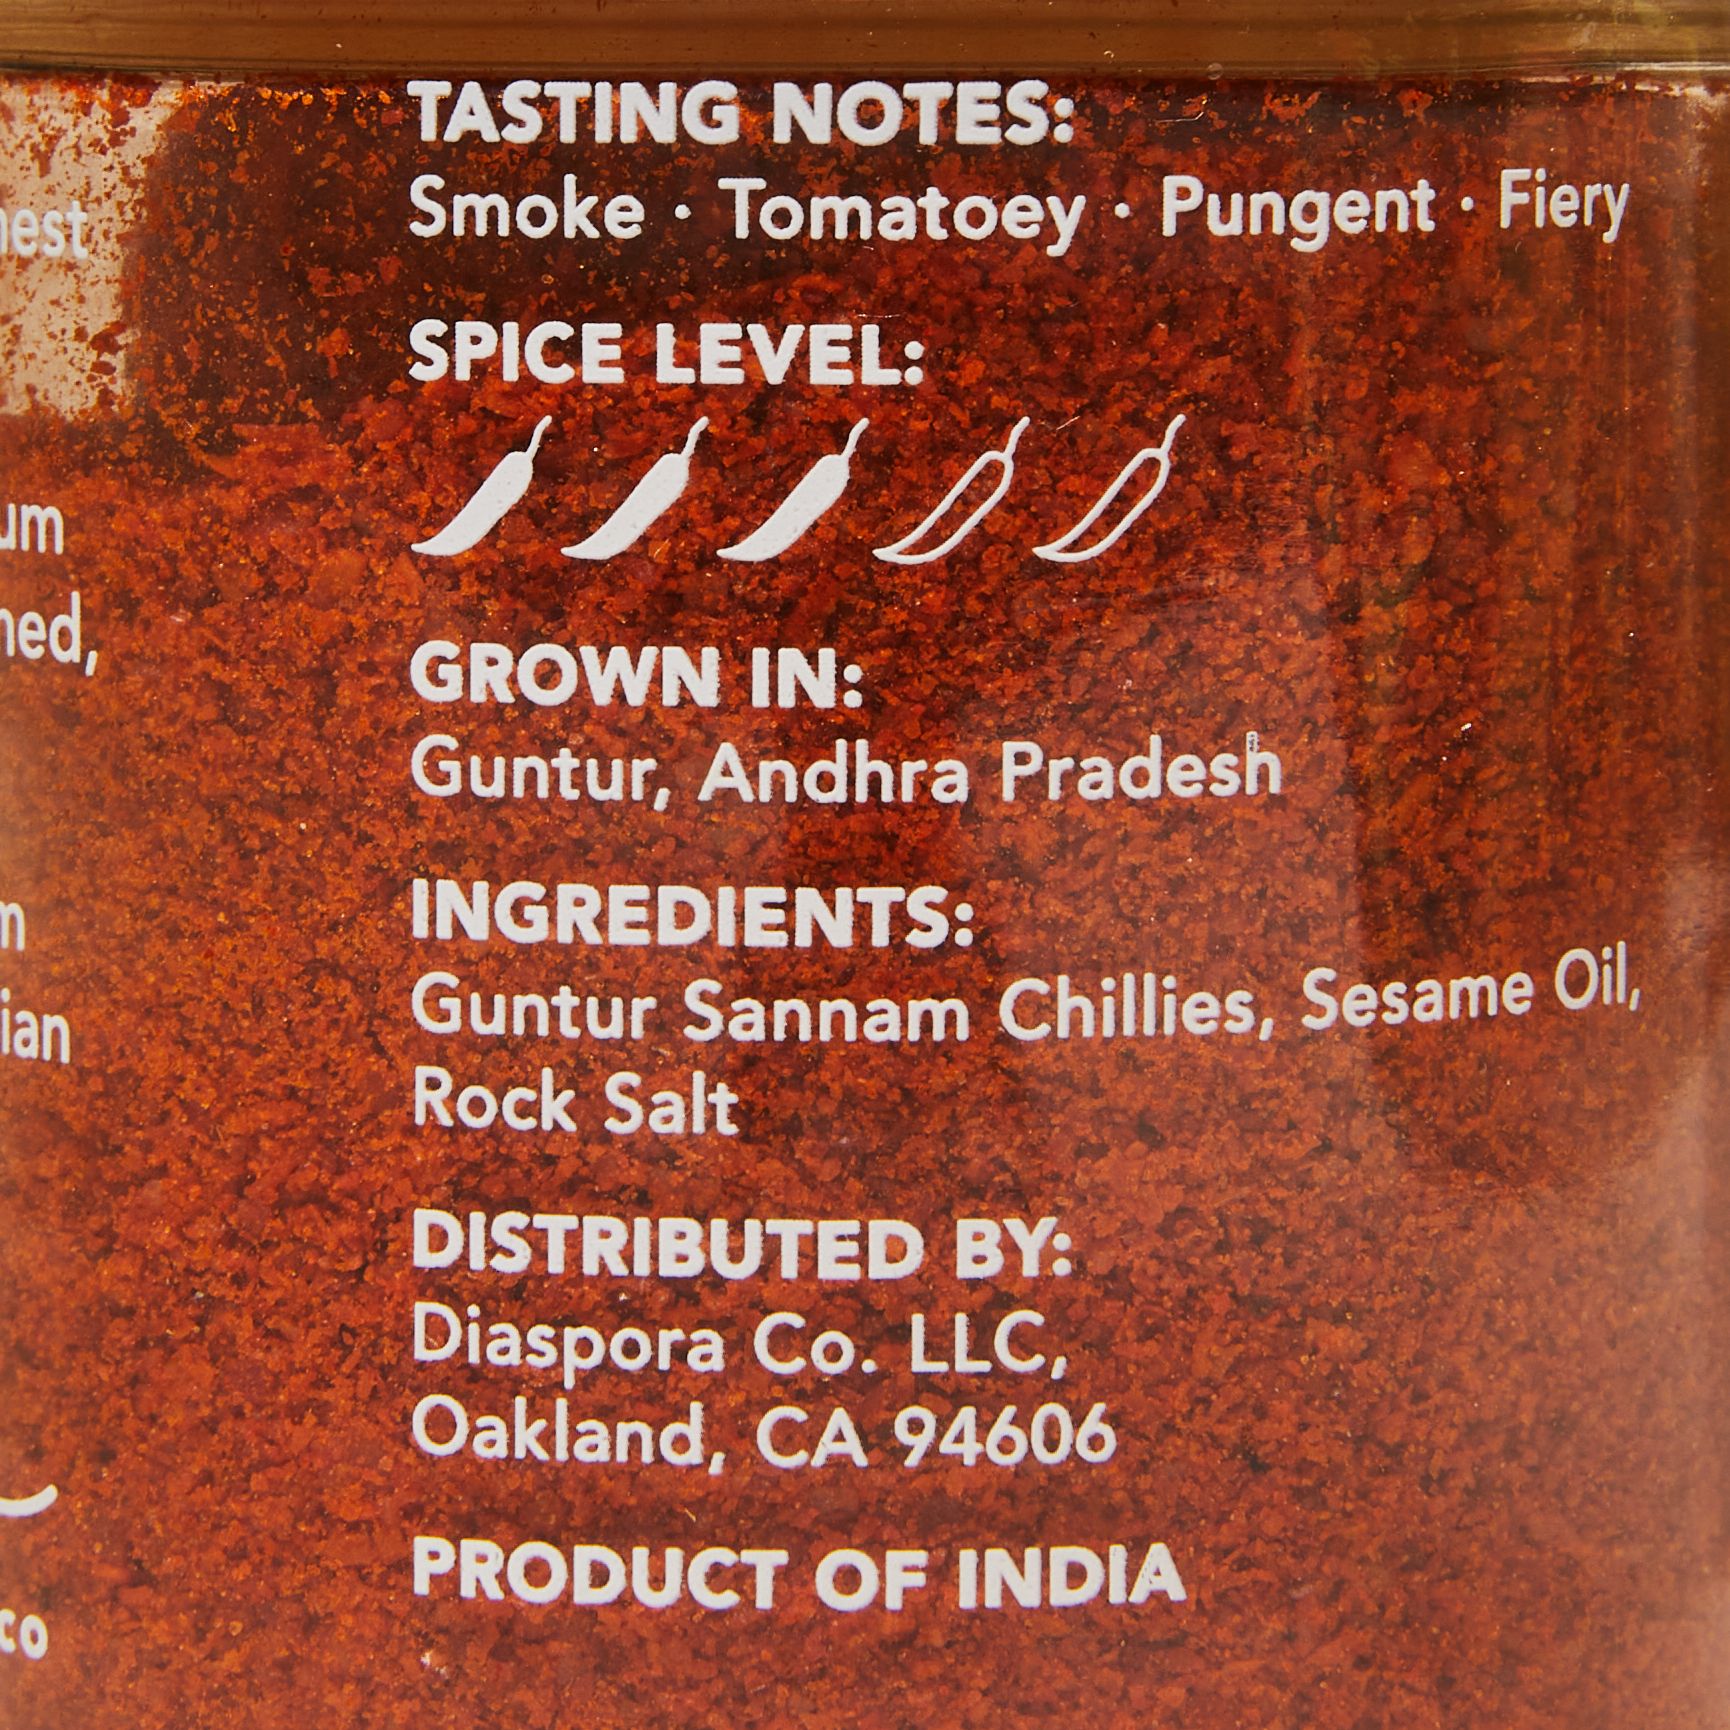 Label that shows tasting notes, spice level, place of origin and ingredients